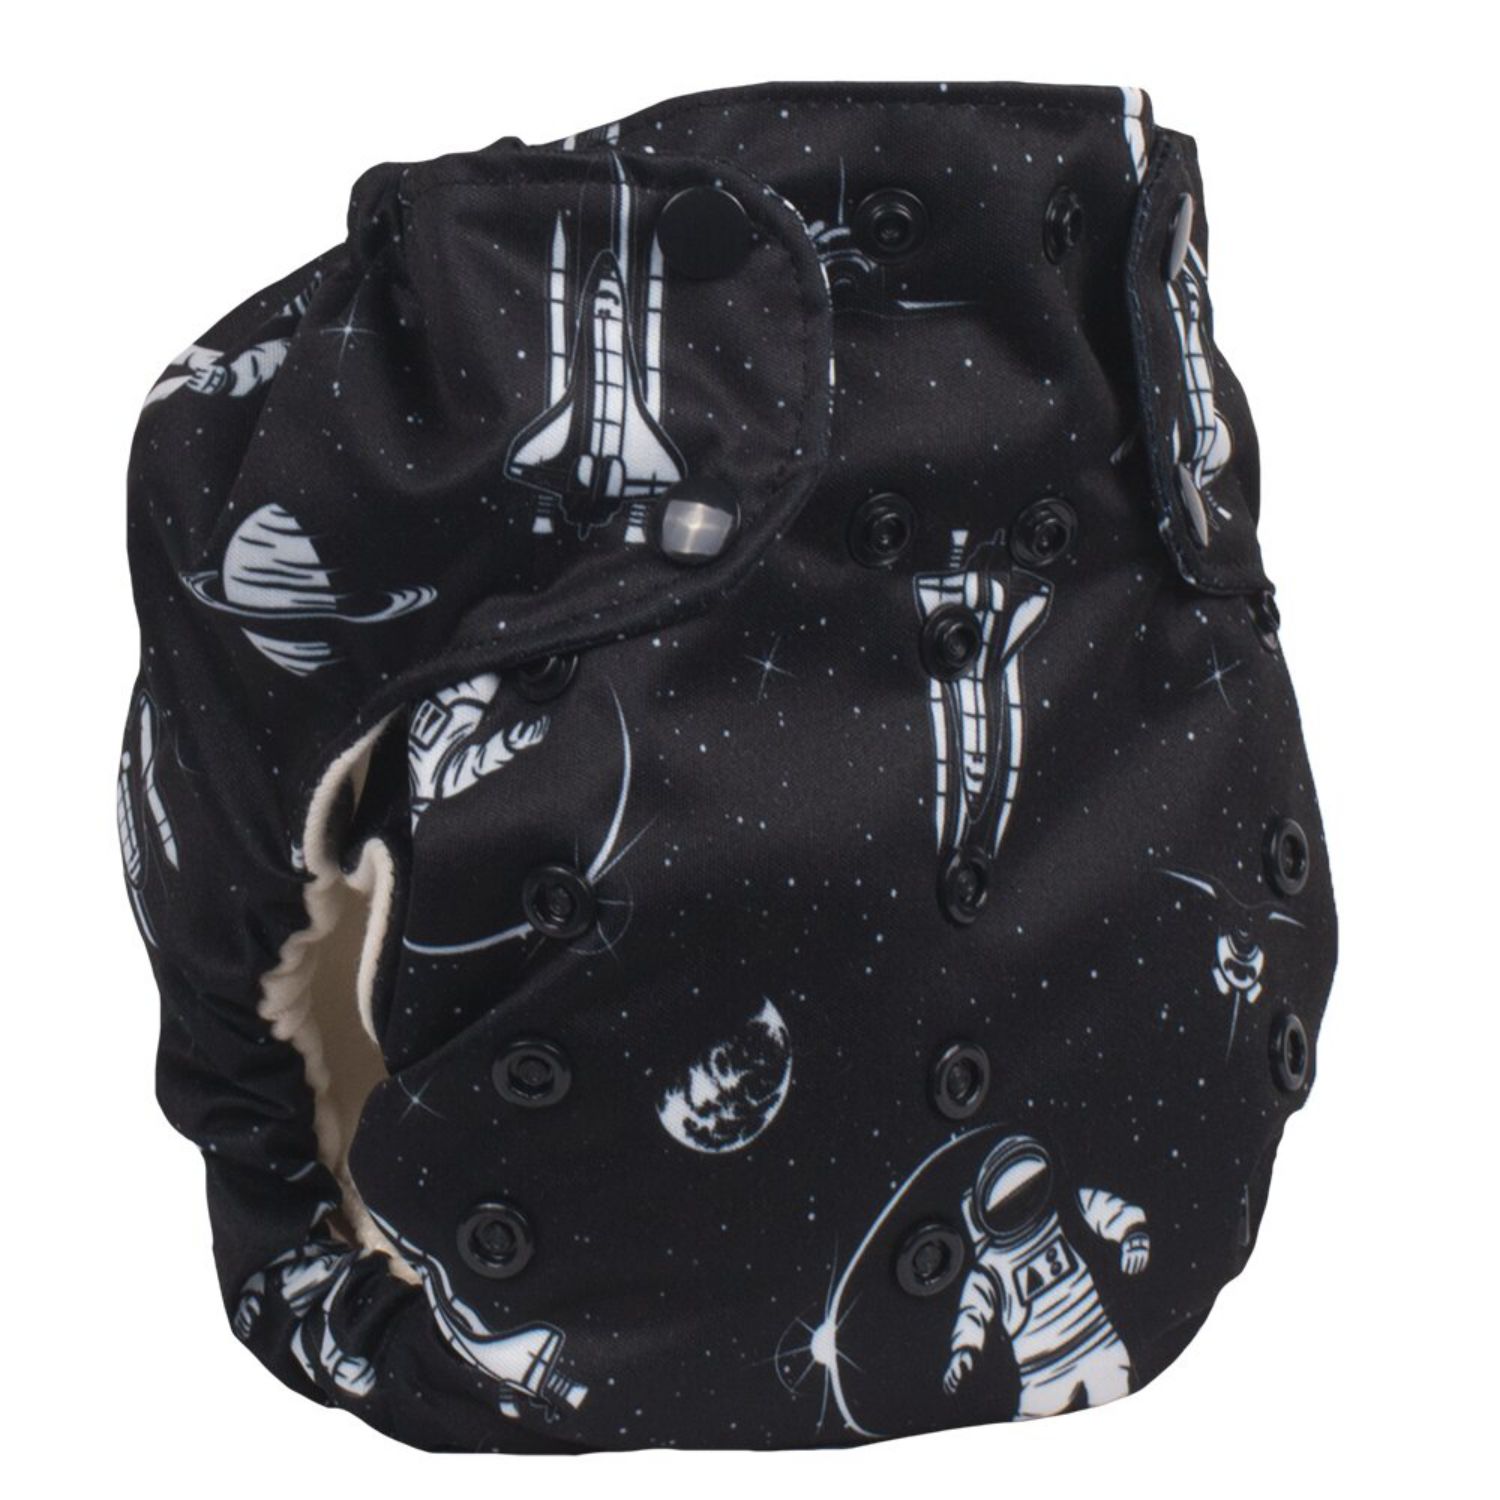 Smart Bottoms 3.1 One Size All-in-One nappy Pattern: Space Race